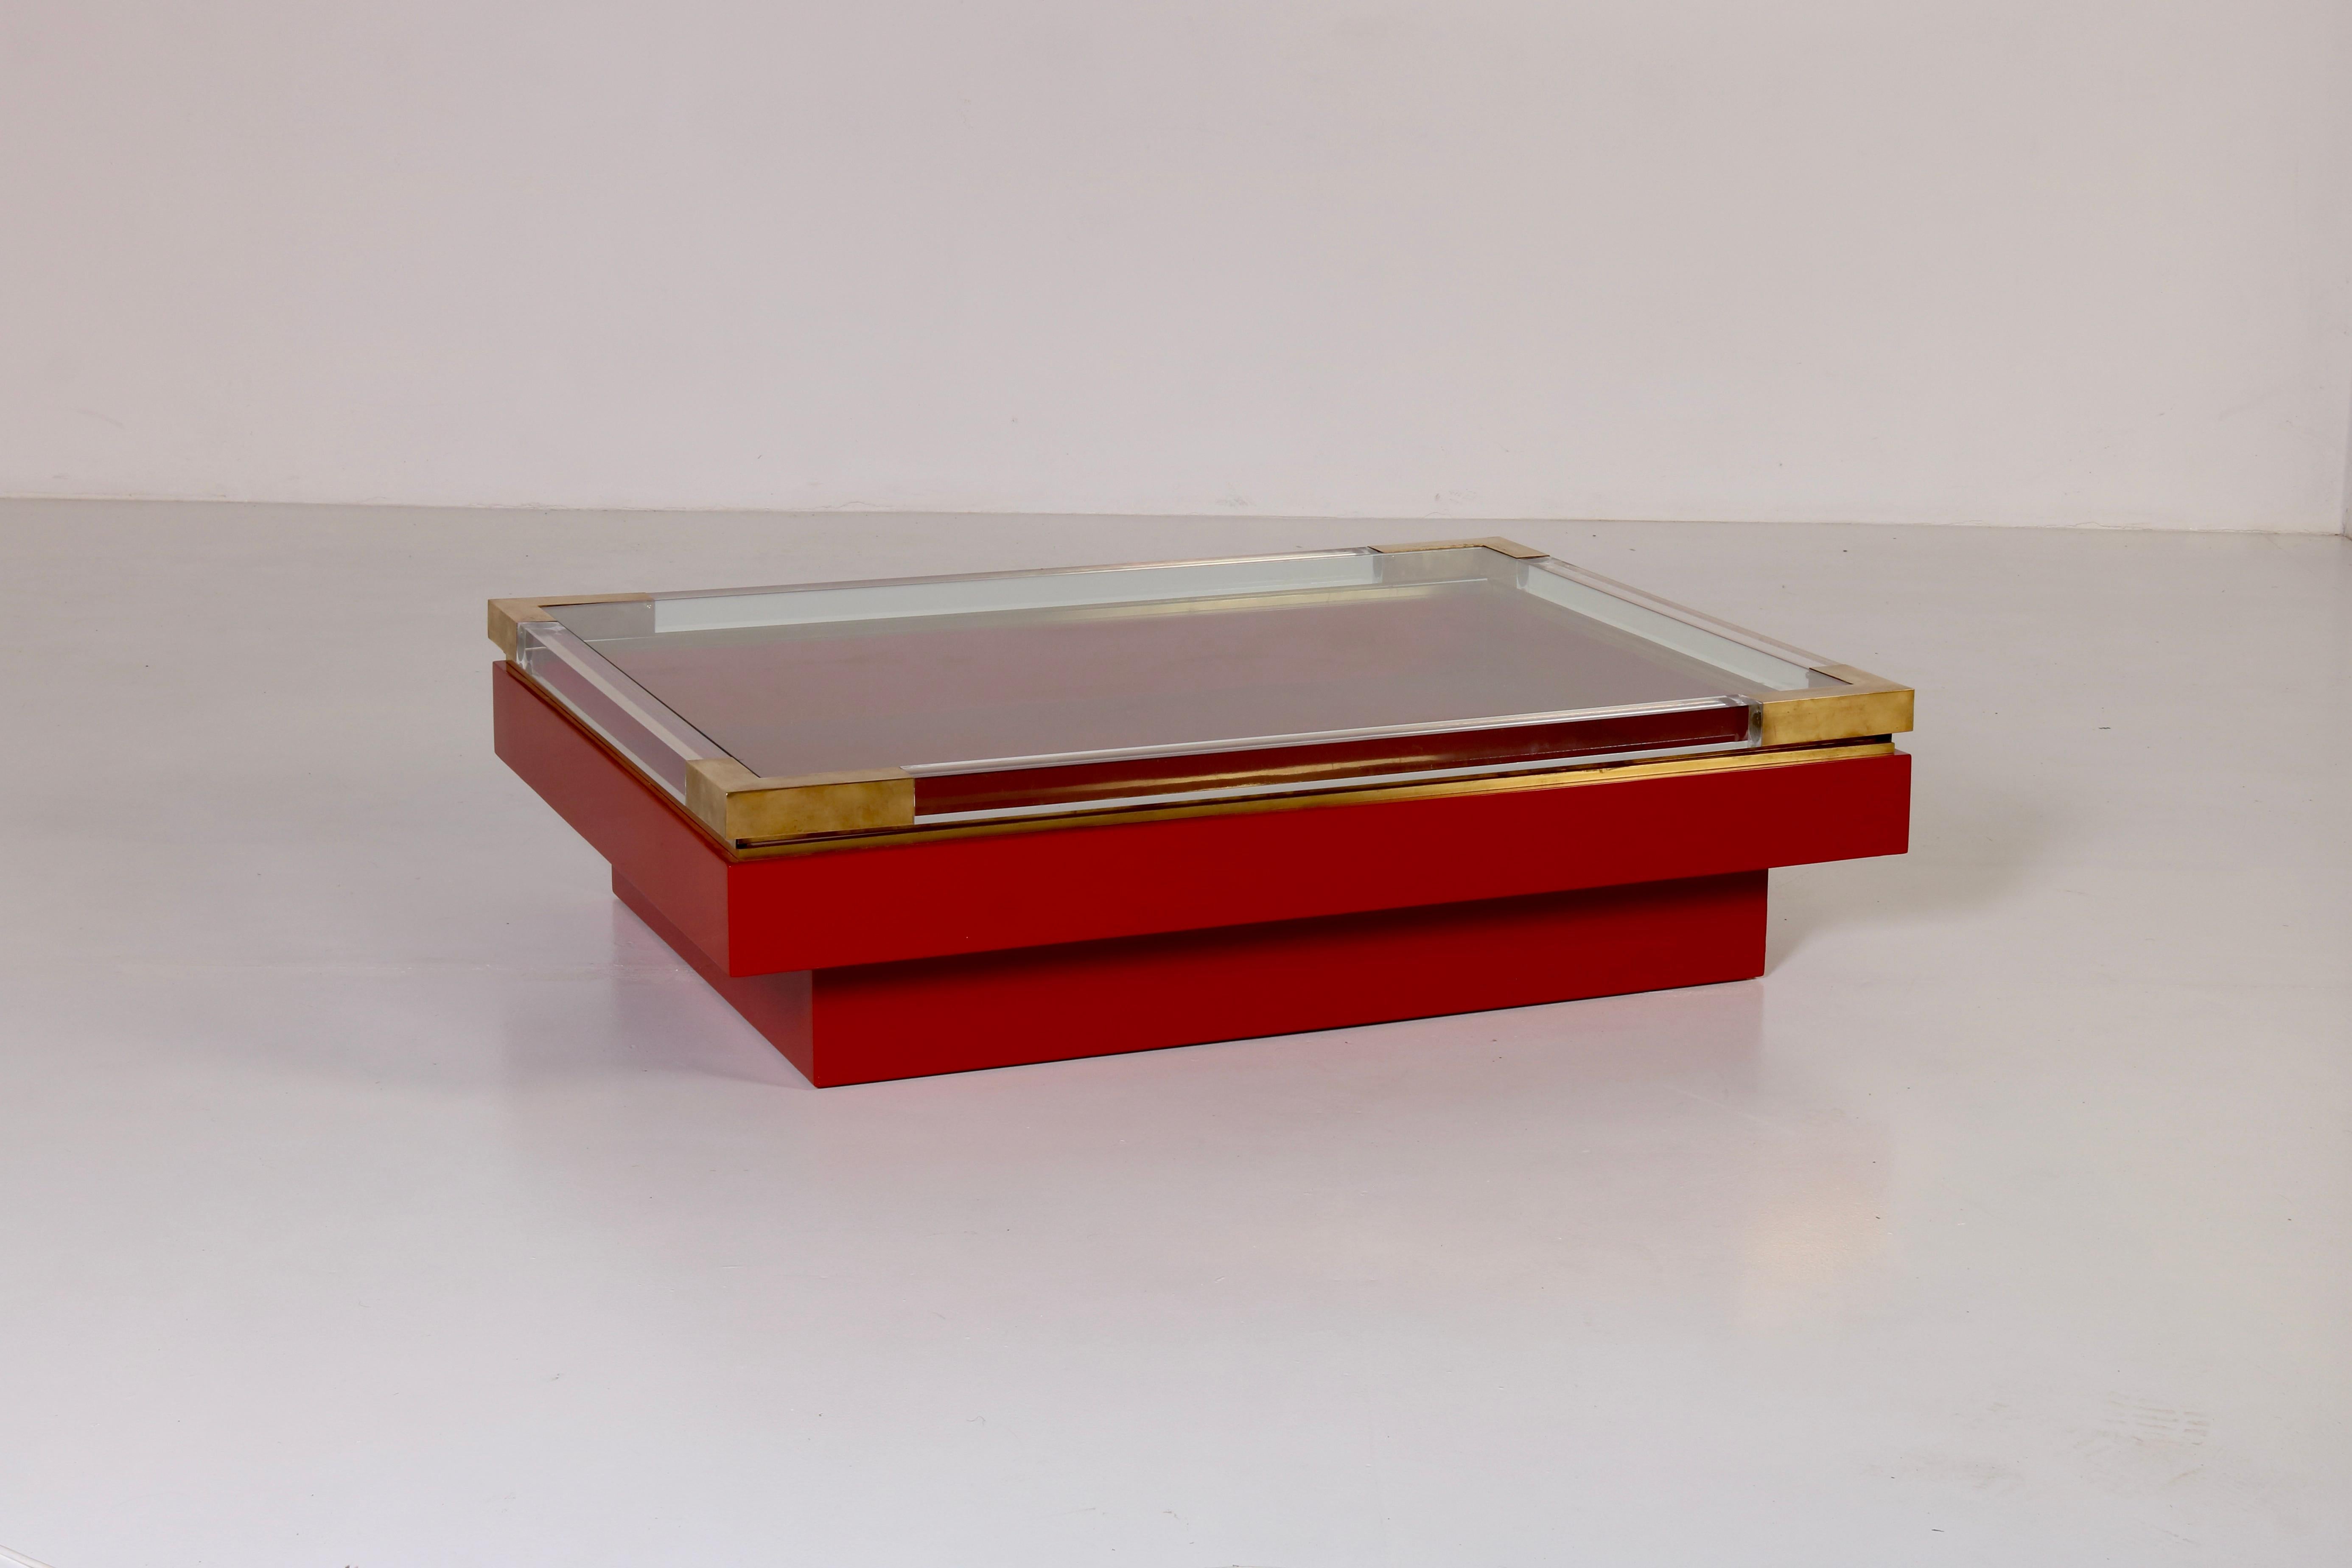 
This stunning sliding top low table in red and gold by Romeo Rega represents an unforgettable masterpiece. The juxtaposition of rich colors and metallic accents with the transparencies of both plexiglass frame and glass top, makes it an unique